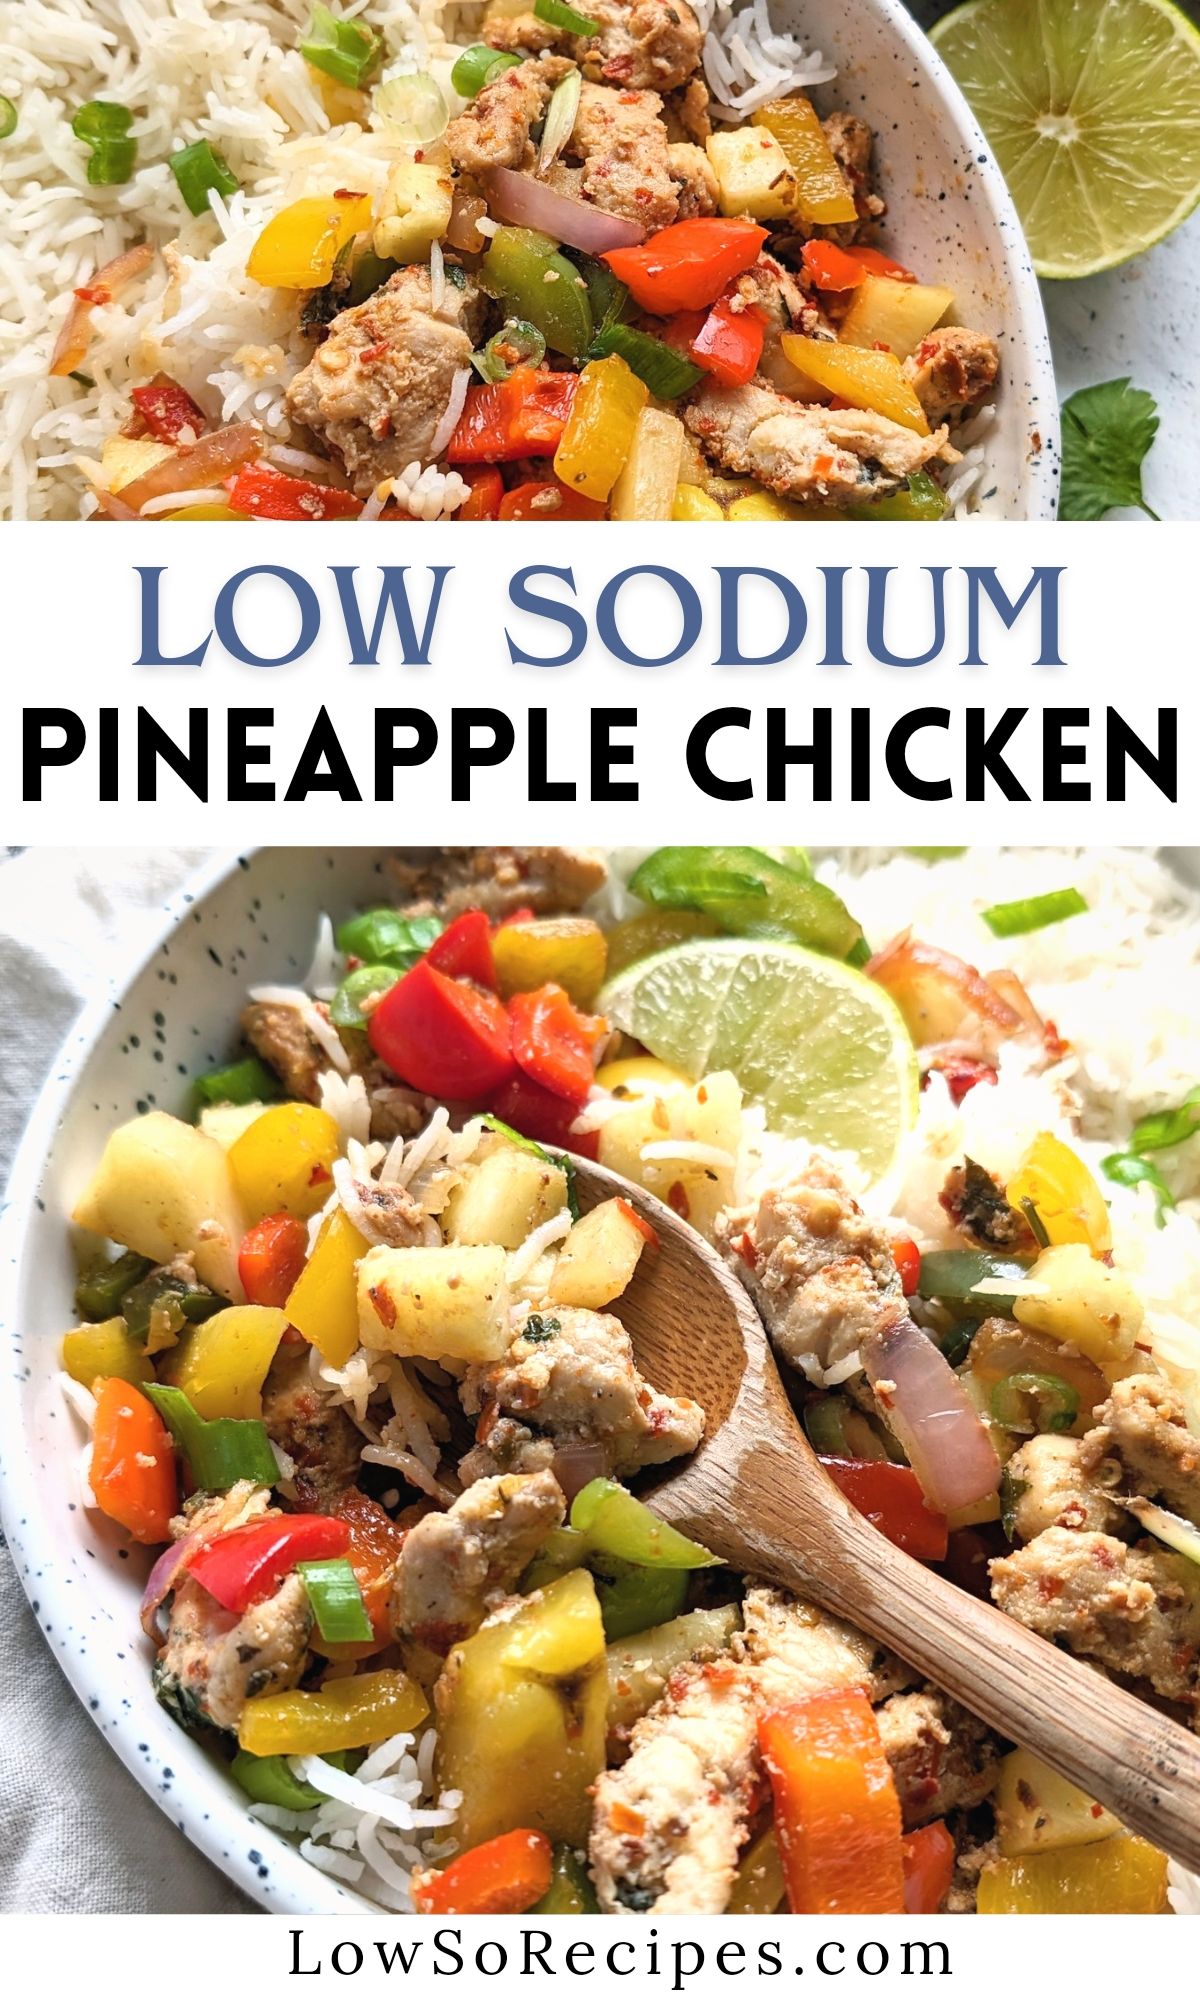 low sodium pineapple chicken recipe easy low sodium chicken ideas low salt chicken recipes with pineapple and bell peppers